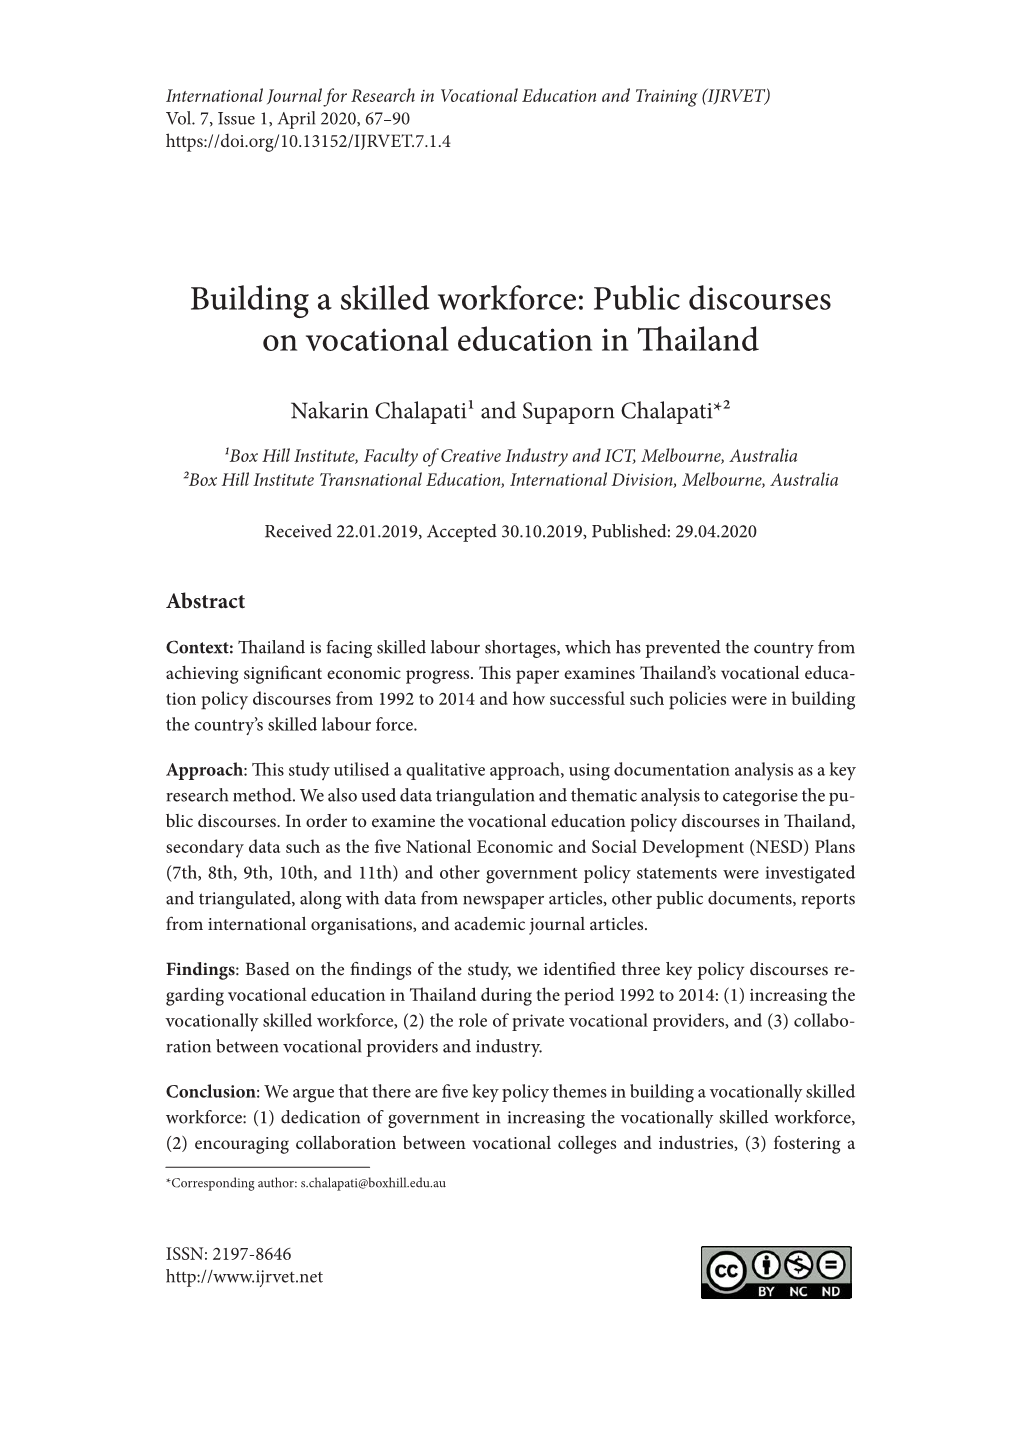 Building a Skilled Workforce: Public Discourses on Vocational Education in Thailand